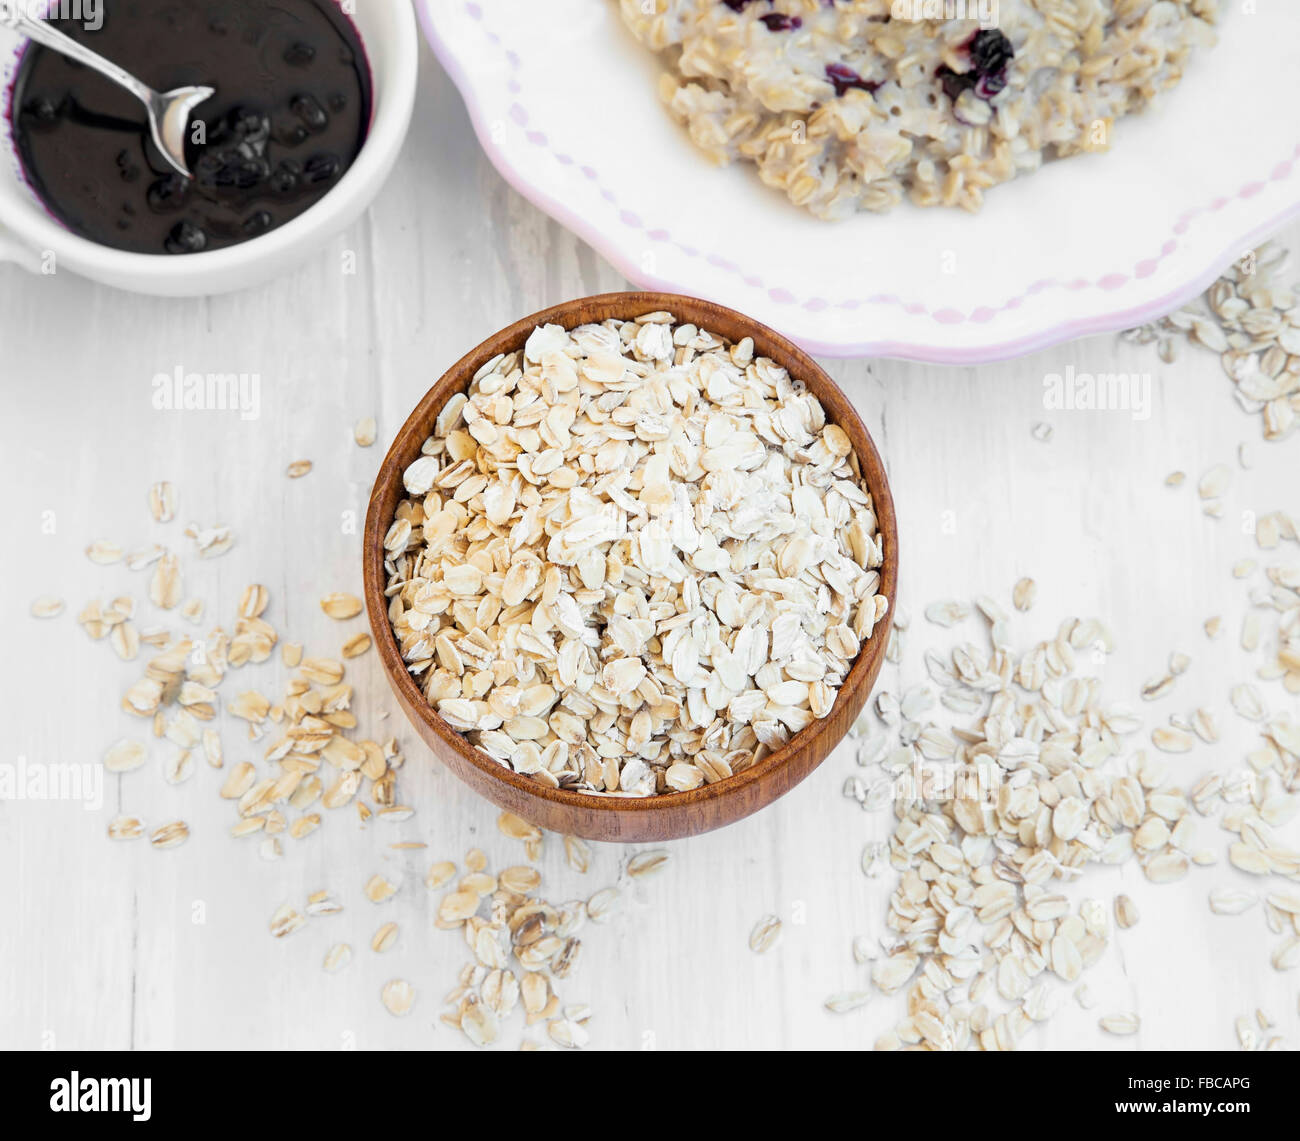 Oatmeal Cereals in a Wooden Bowl and Porridge in the Background Stock Photo